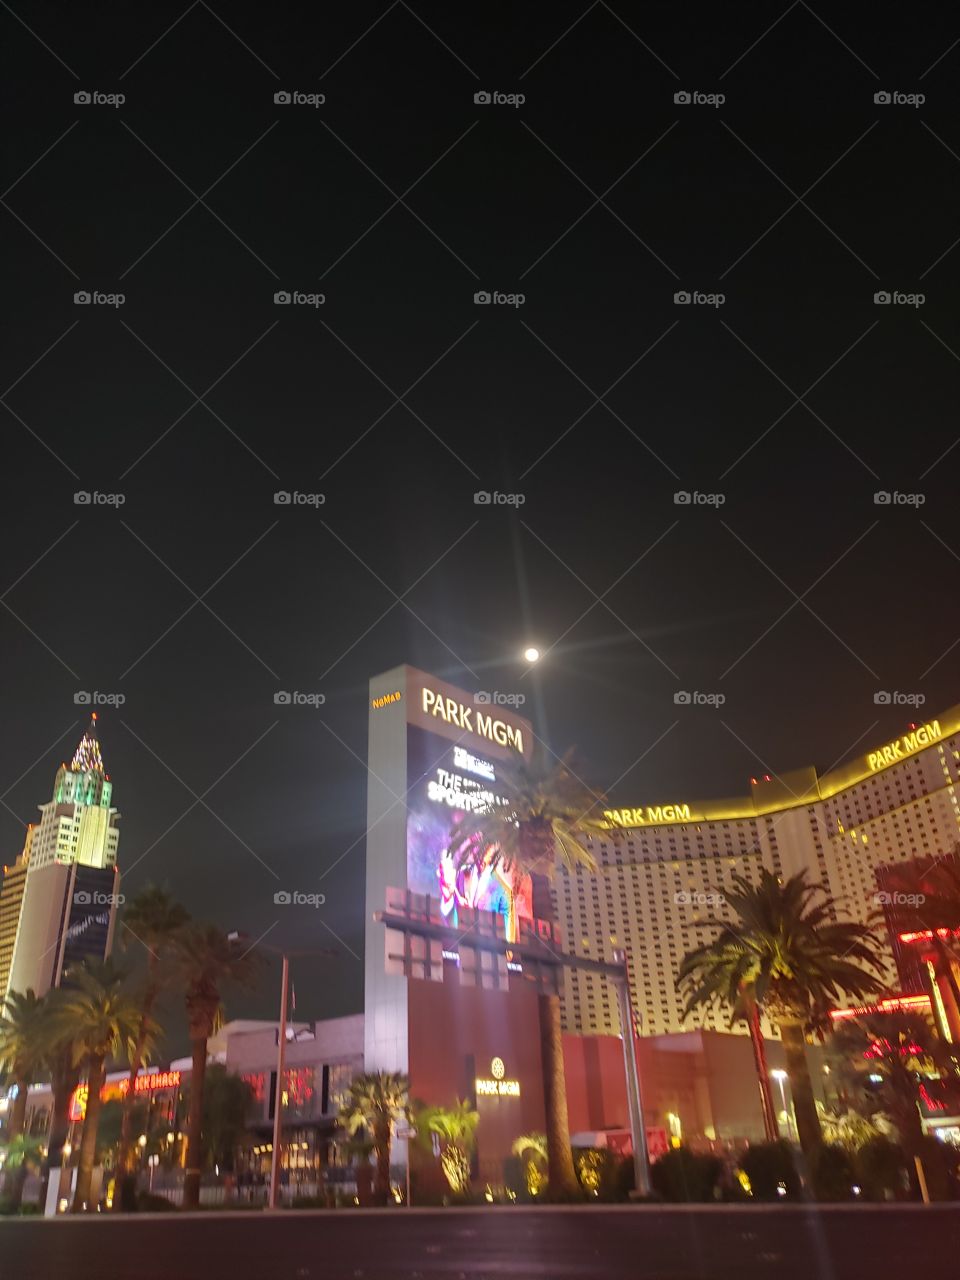 My picture of the Las Vegas strip in Las Vegas Nevada for the Urban challenge